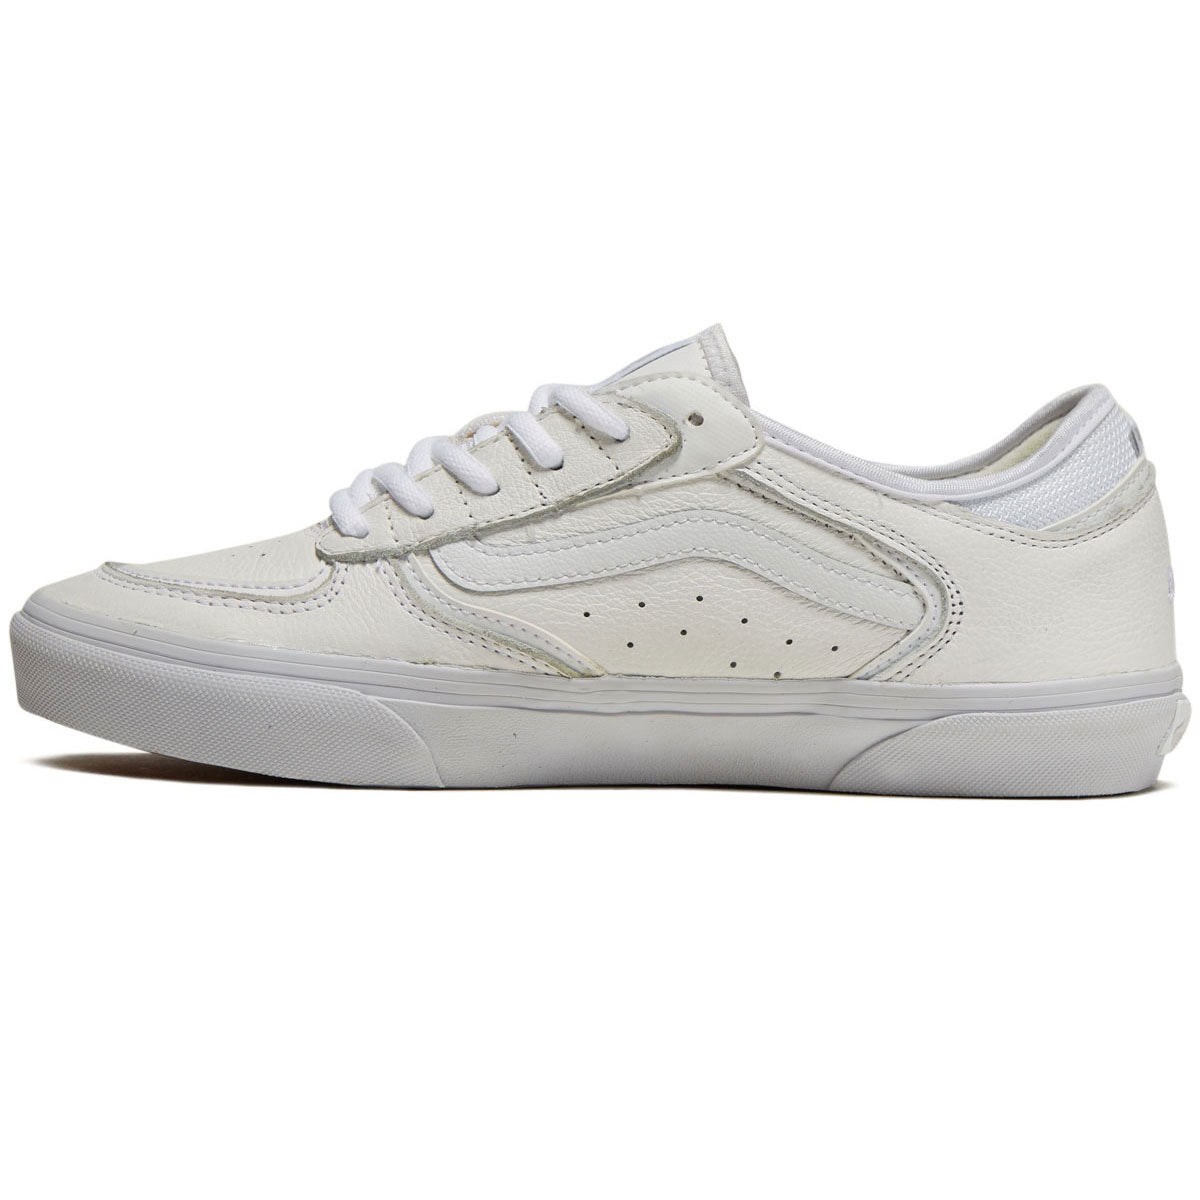 Vans Skate Rowley Shoes - Leather White/White image 2